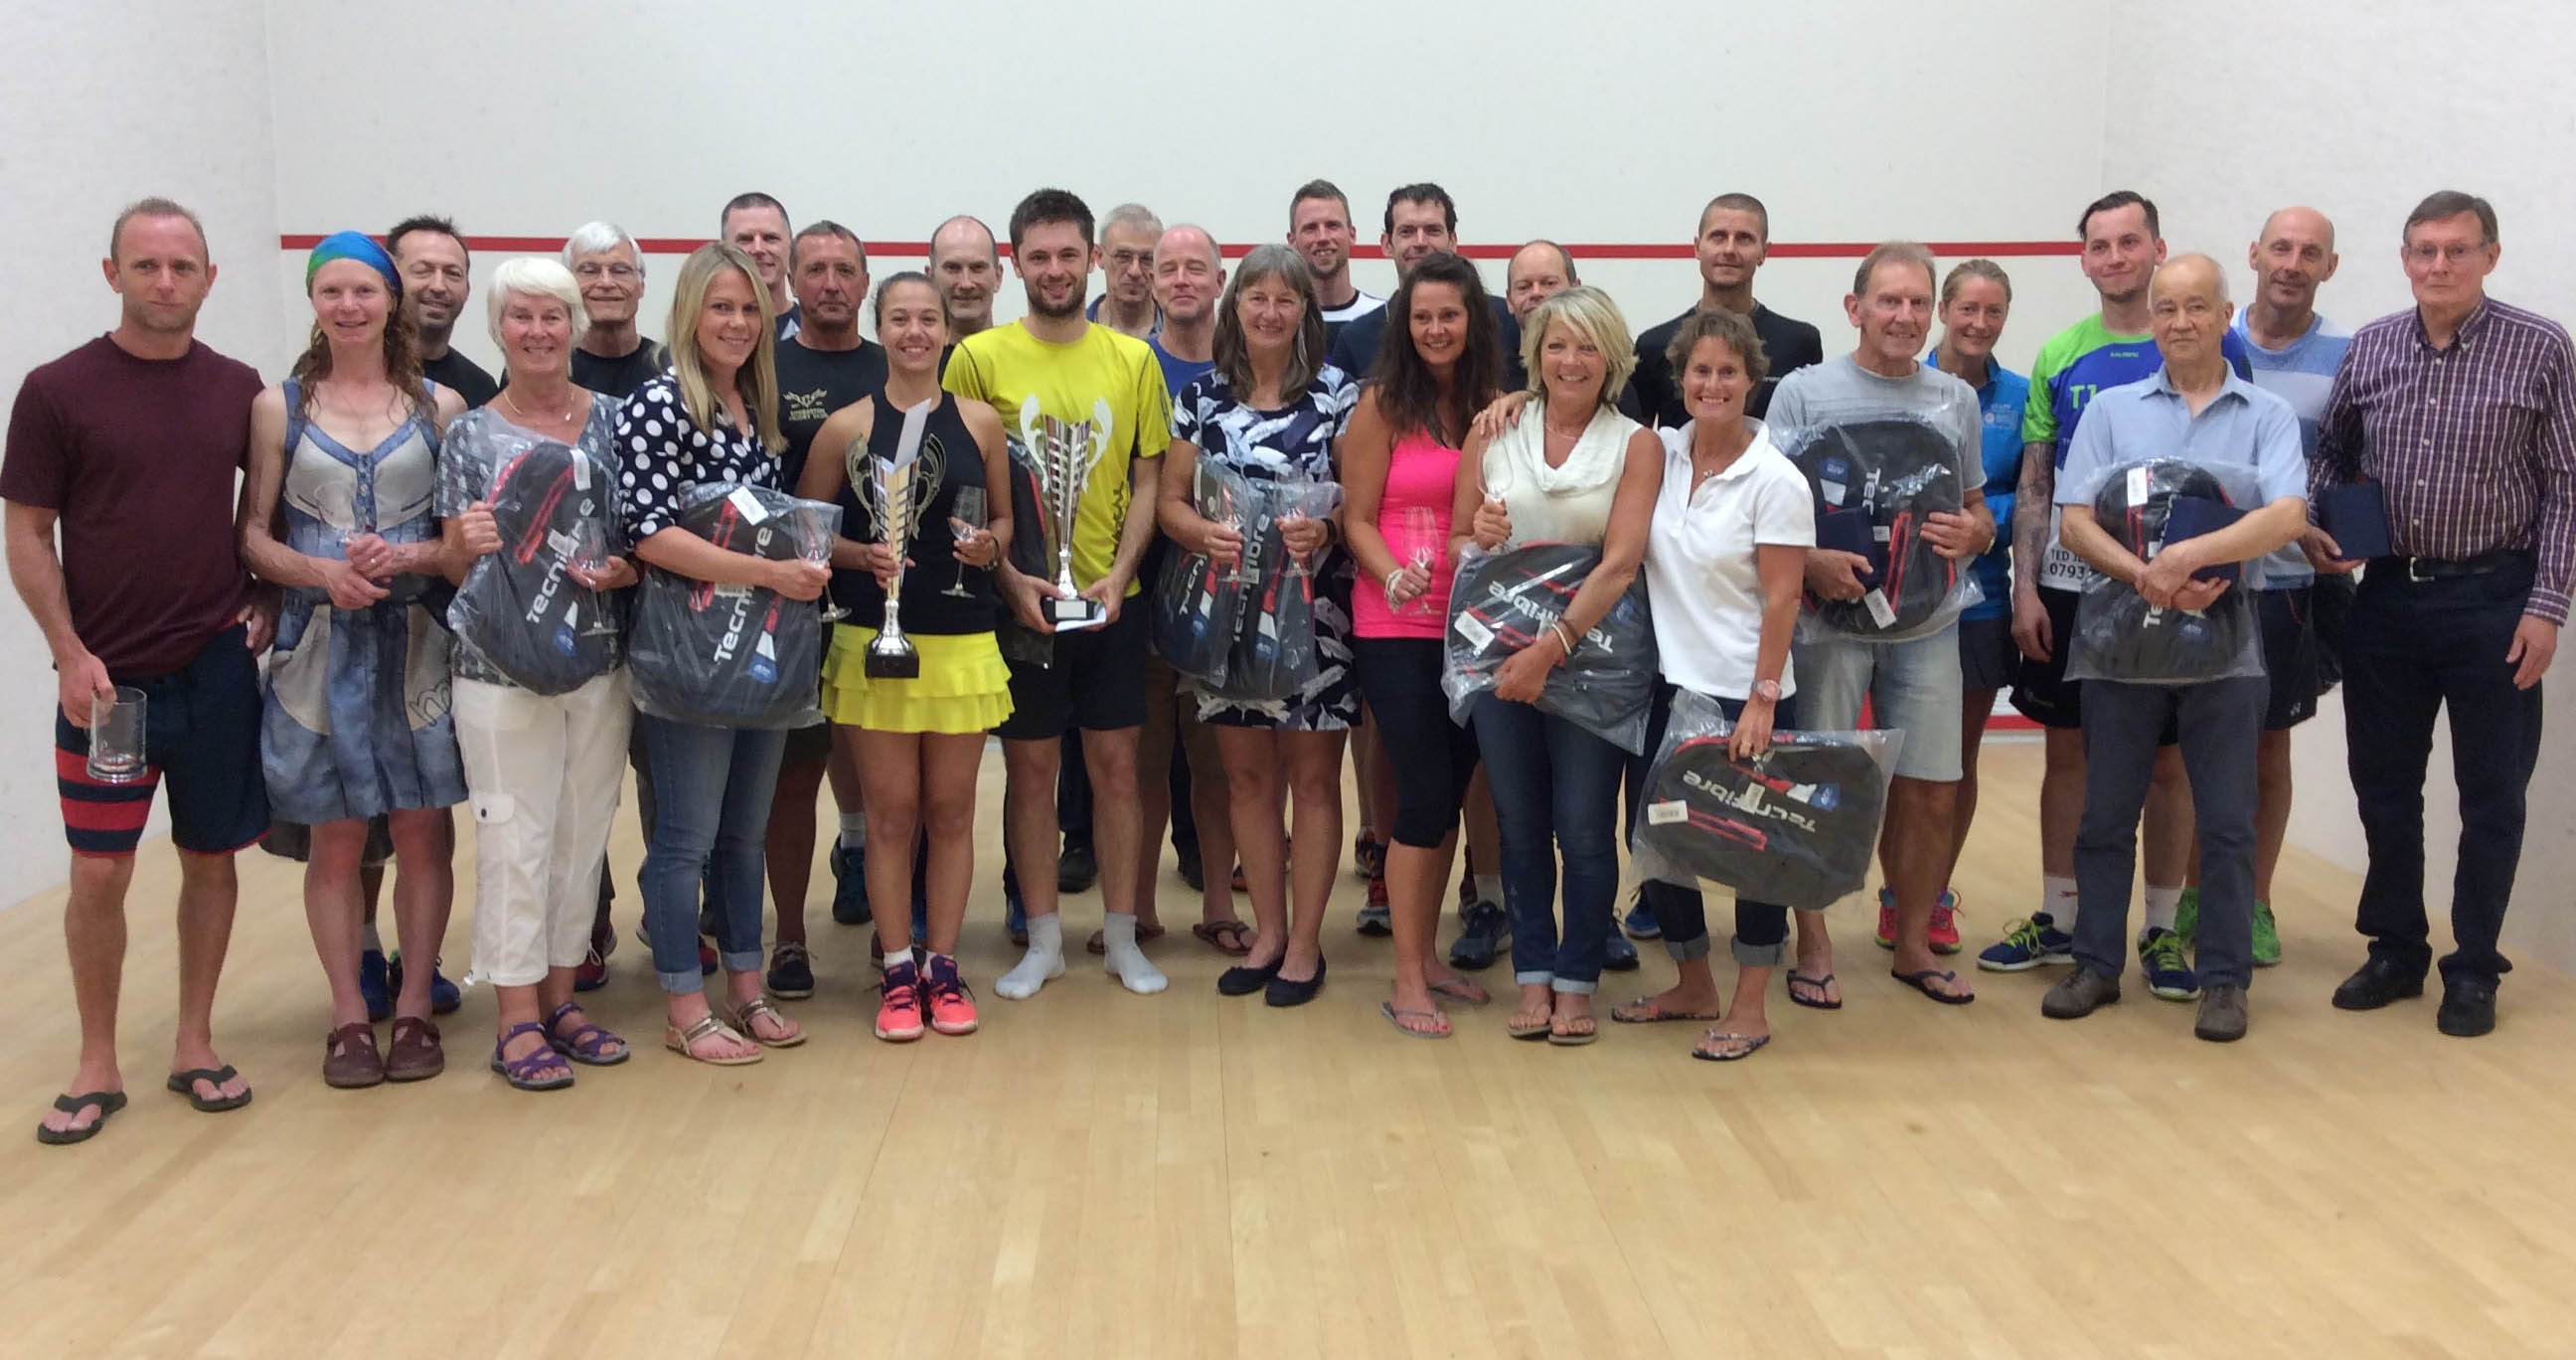 Winners and runners-up at the National Squash 57 Championships in Birmingham